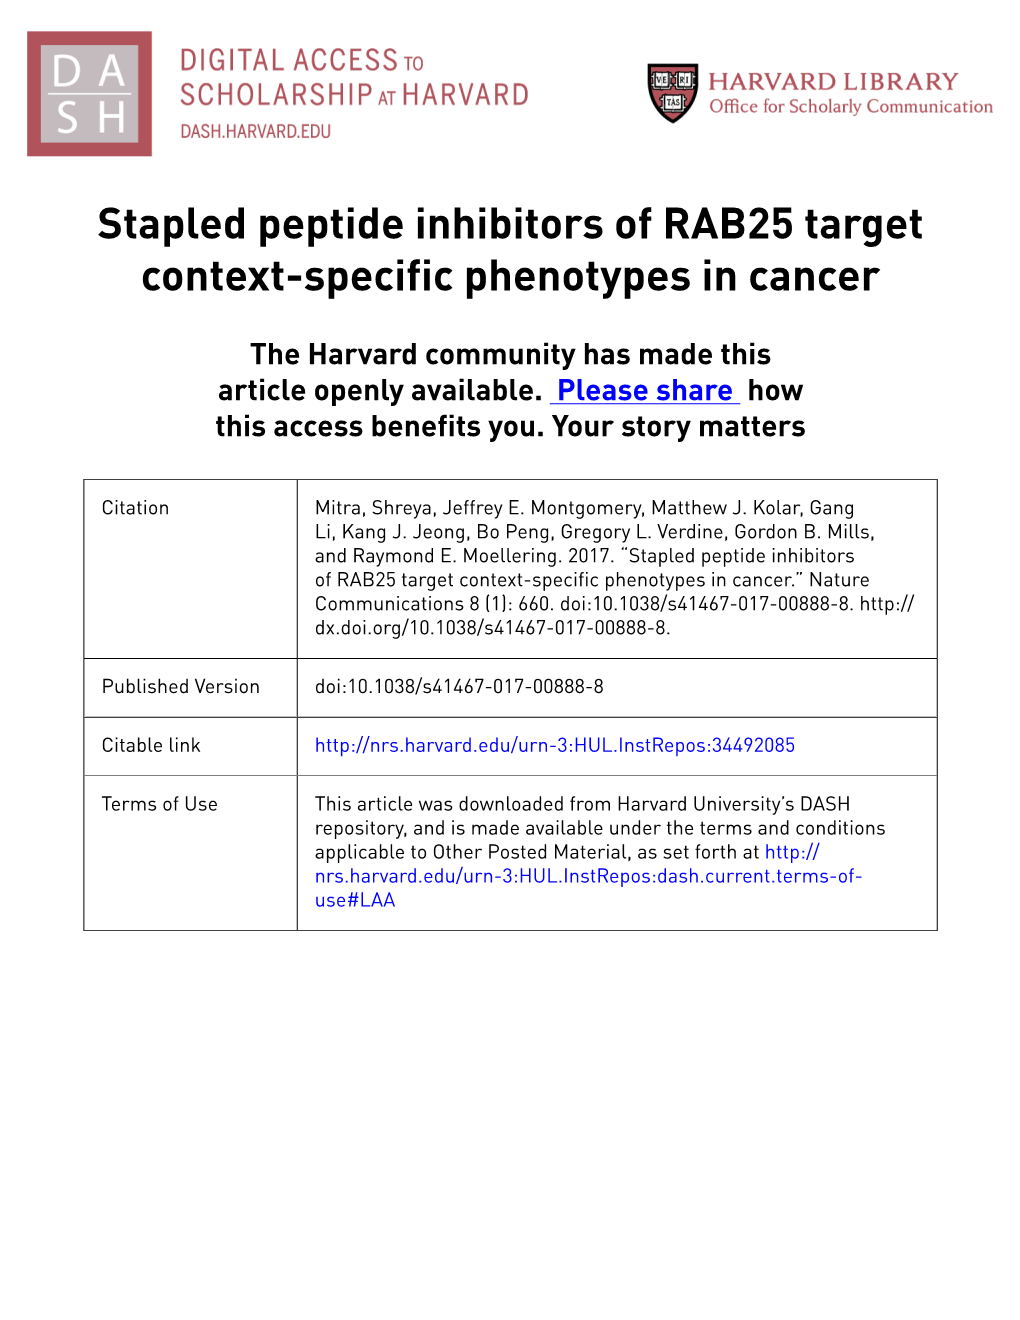 Stapled Peptide Inhibitors of RAB25 Target Context-Specific Phenotypes in Cancer